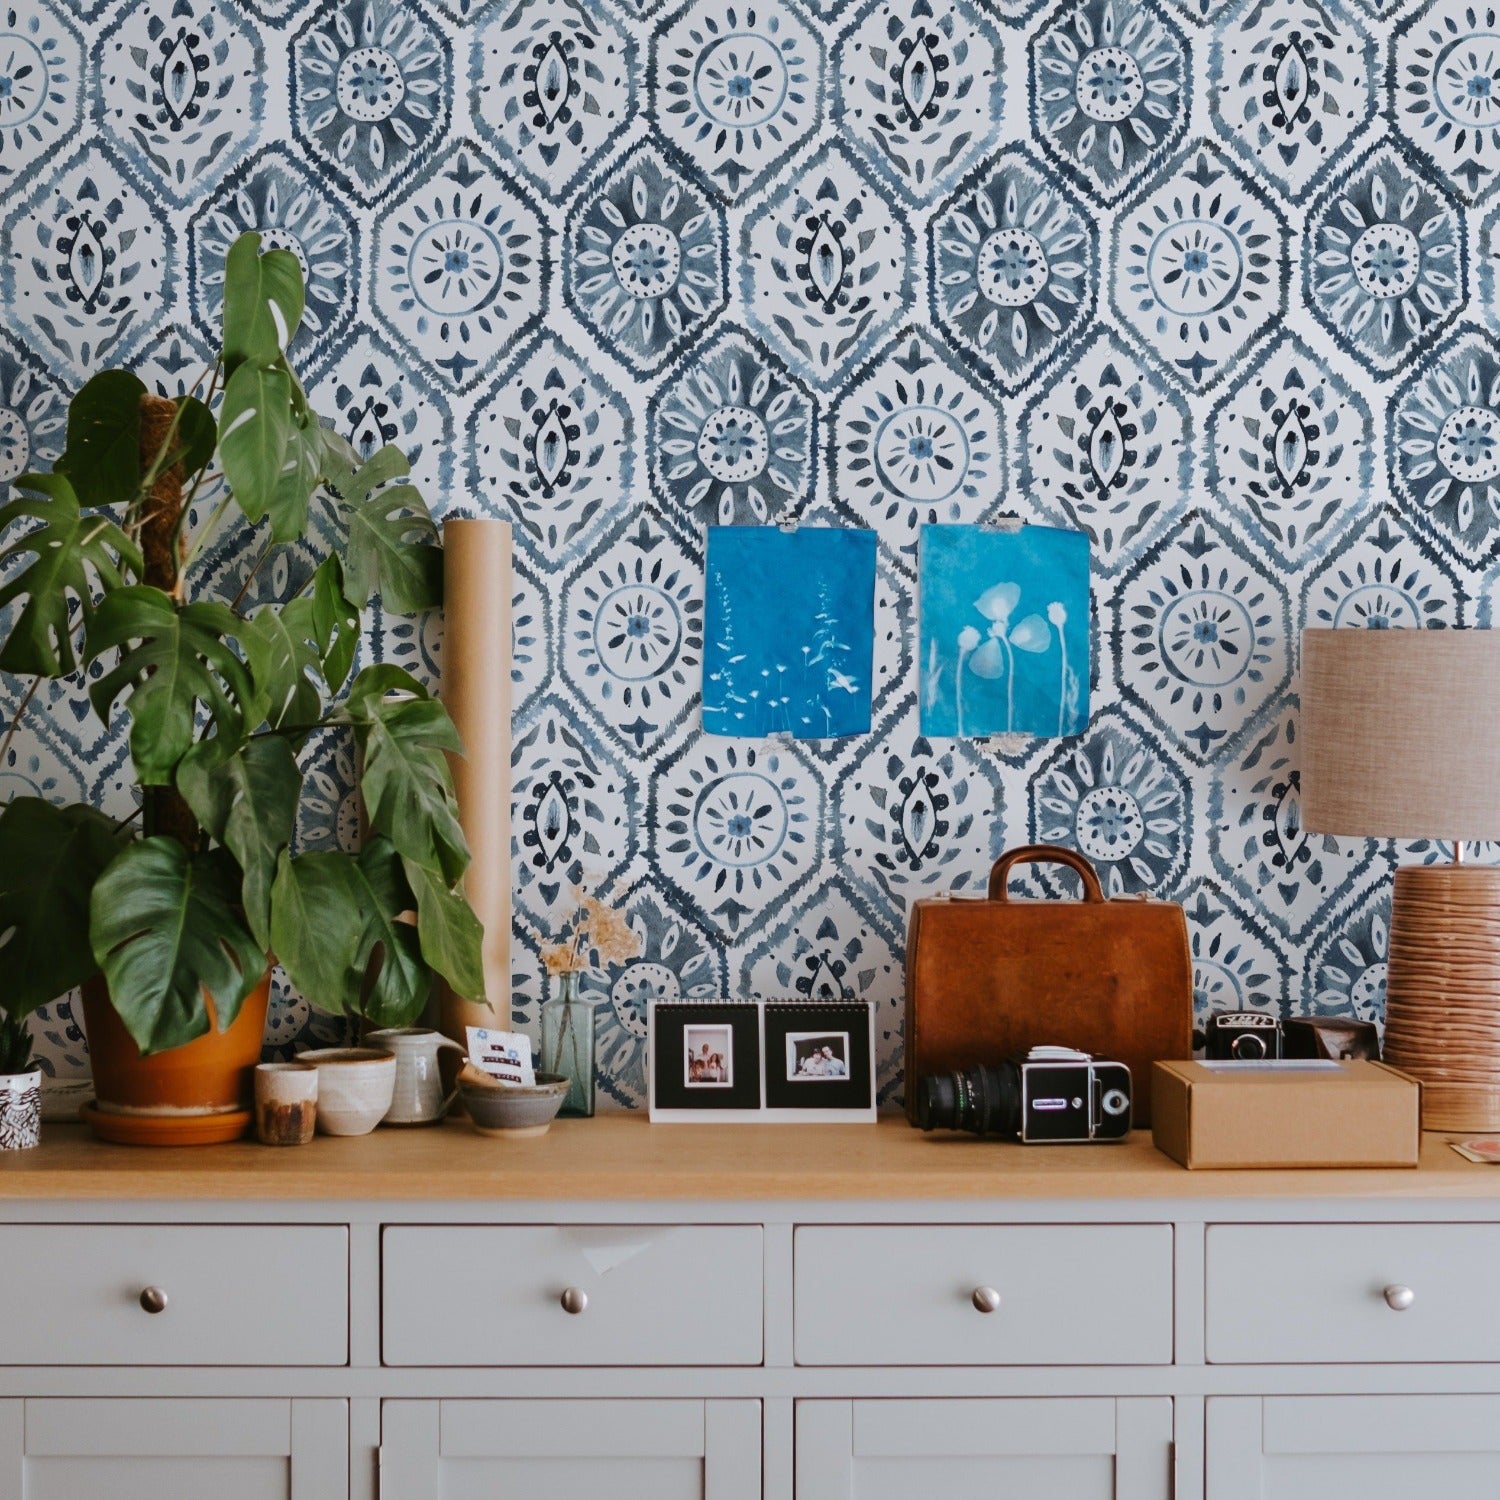 Home office space with a white cabinet adorned with personal items and green plants, set against a backdrop of Moroccan Tile wallpaper in shades of indigo blue.